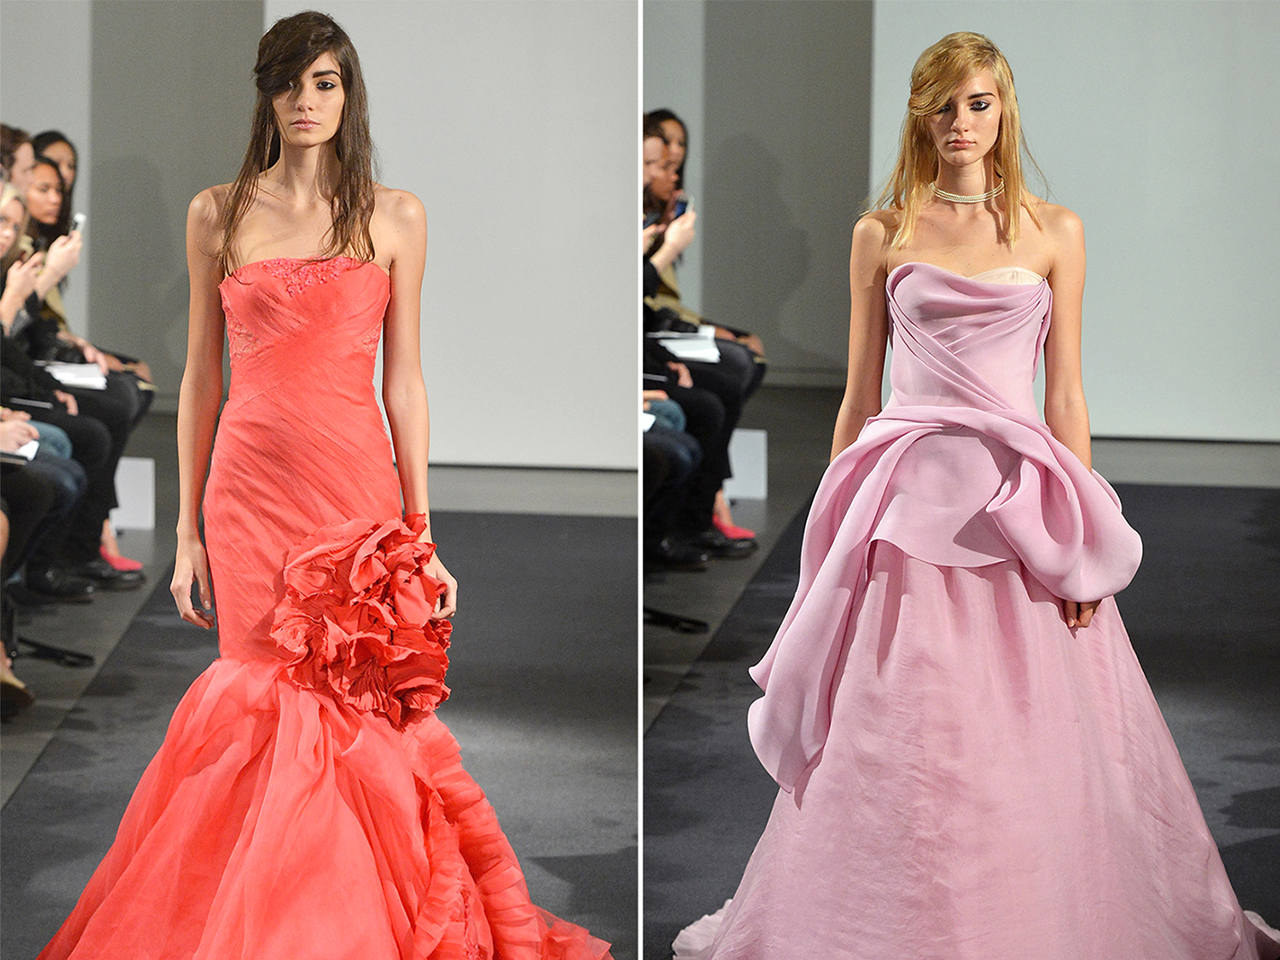 Vera Wang ends try-on dress charges - but what do YOU think?